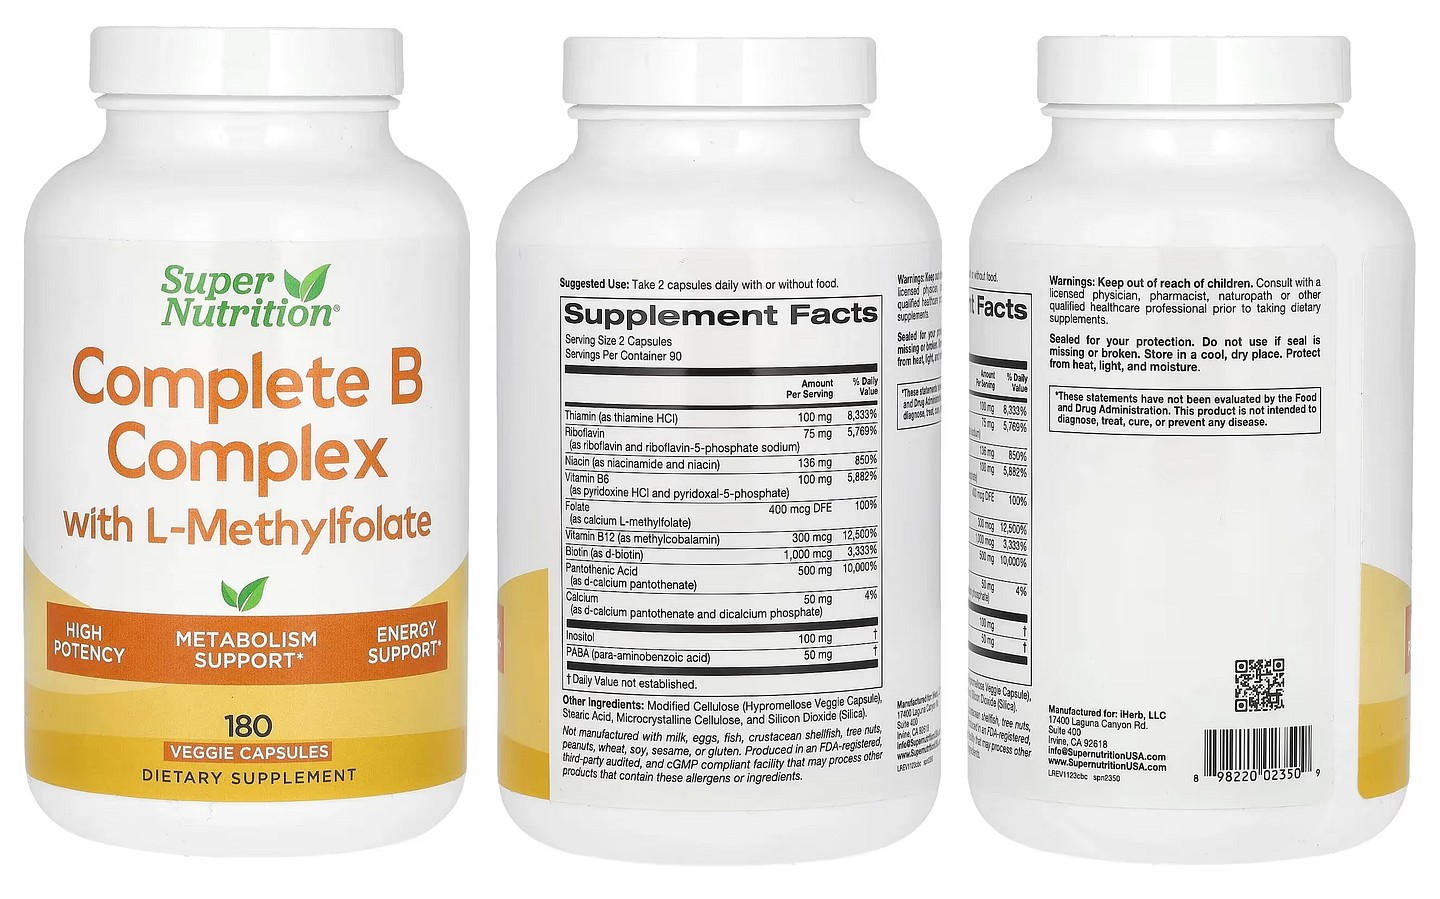 Super Nutrition, Complete B Complex with L-Methylfolate packaging